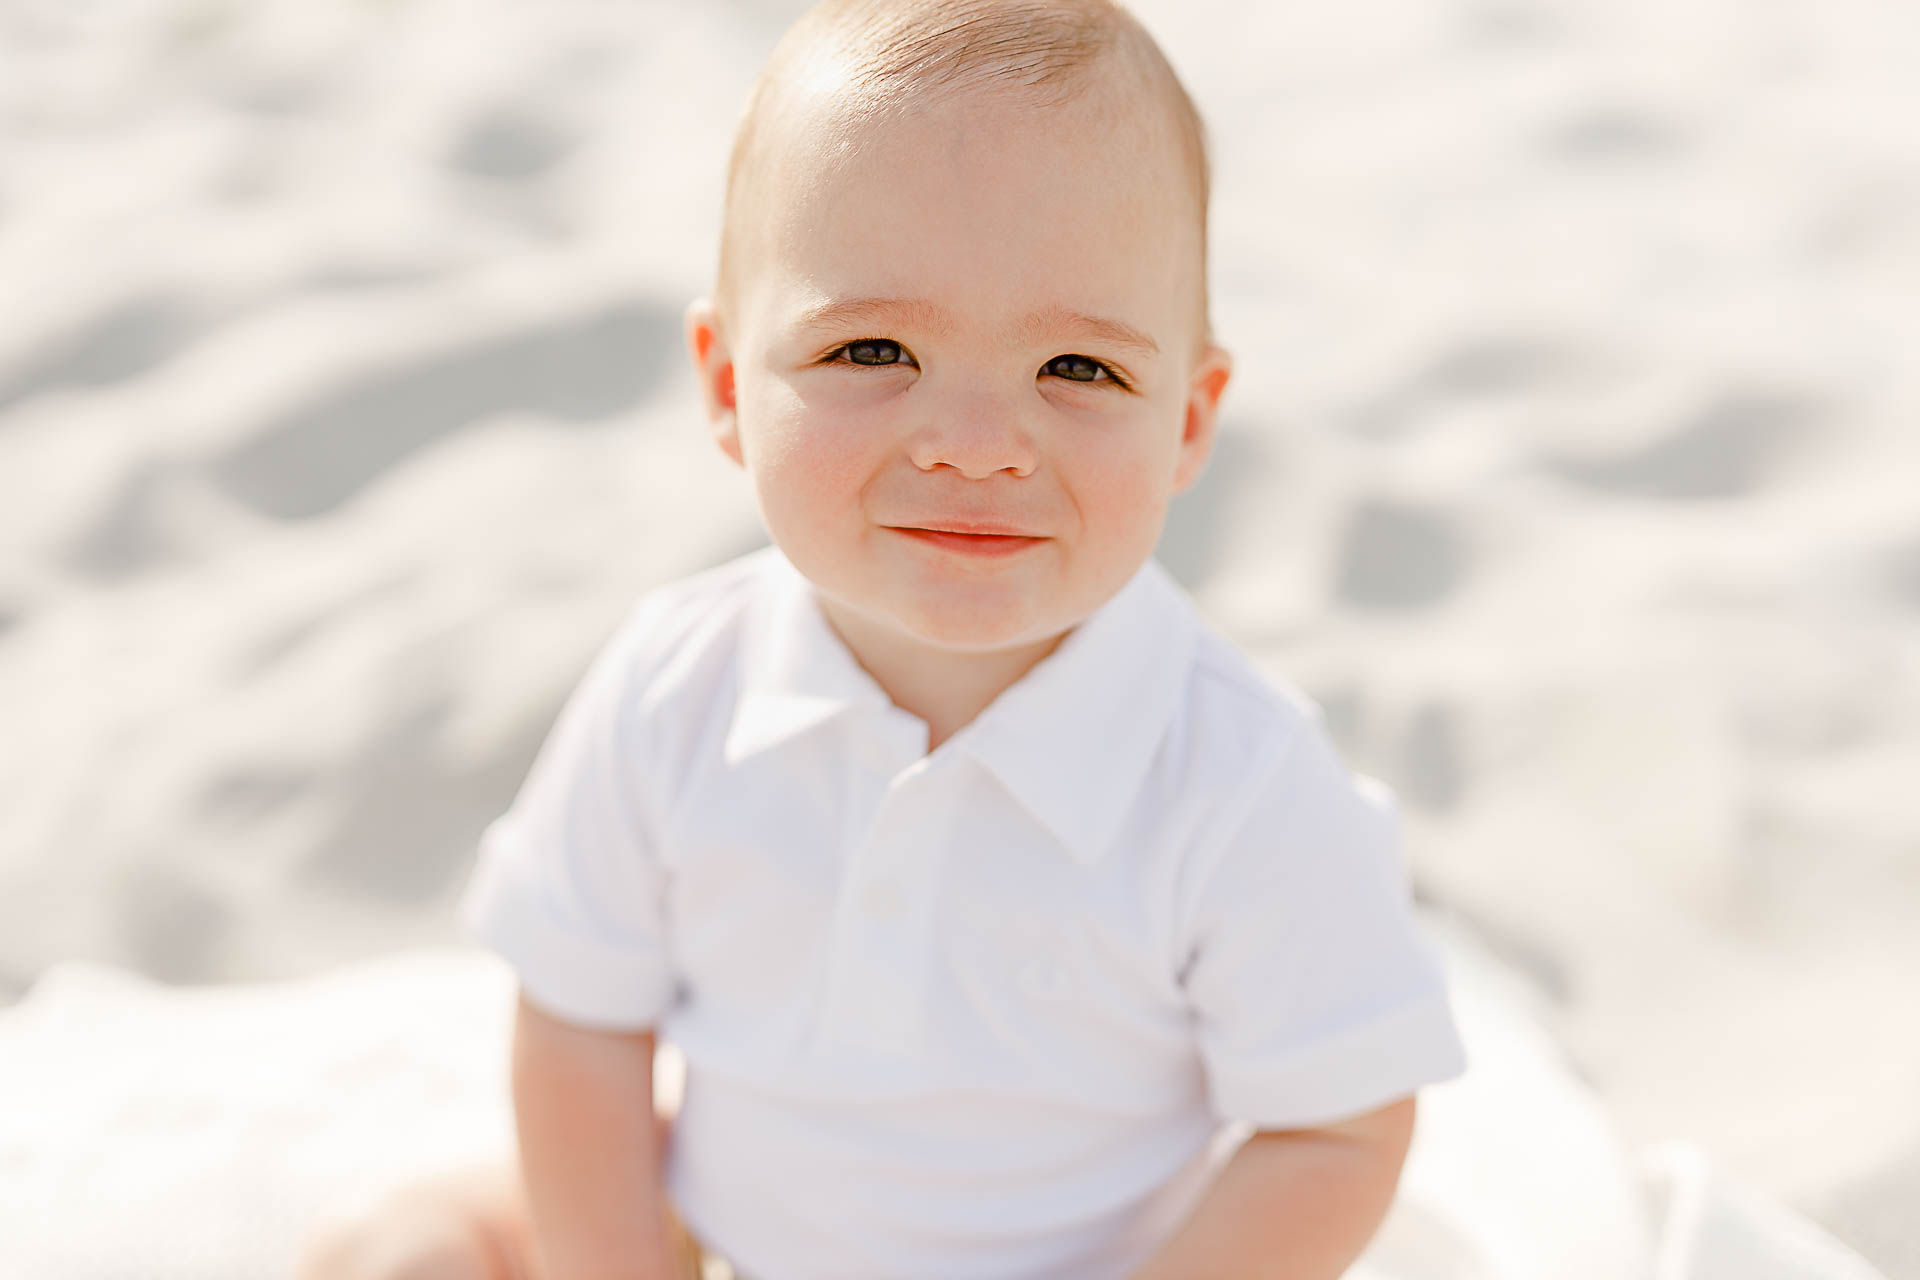 Image by South Shore Baby Photographer Christina Runnals | Baby sitting on the beach